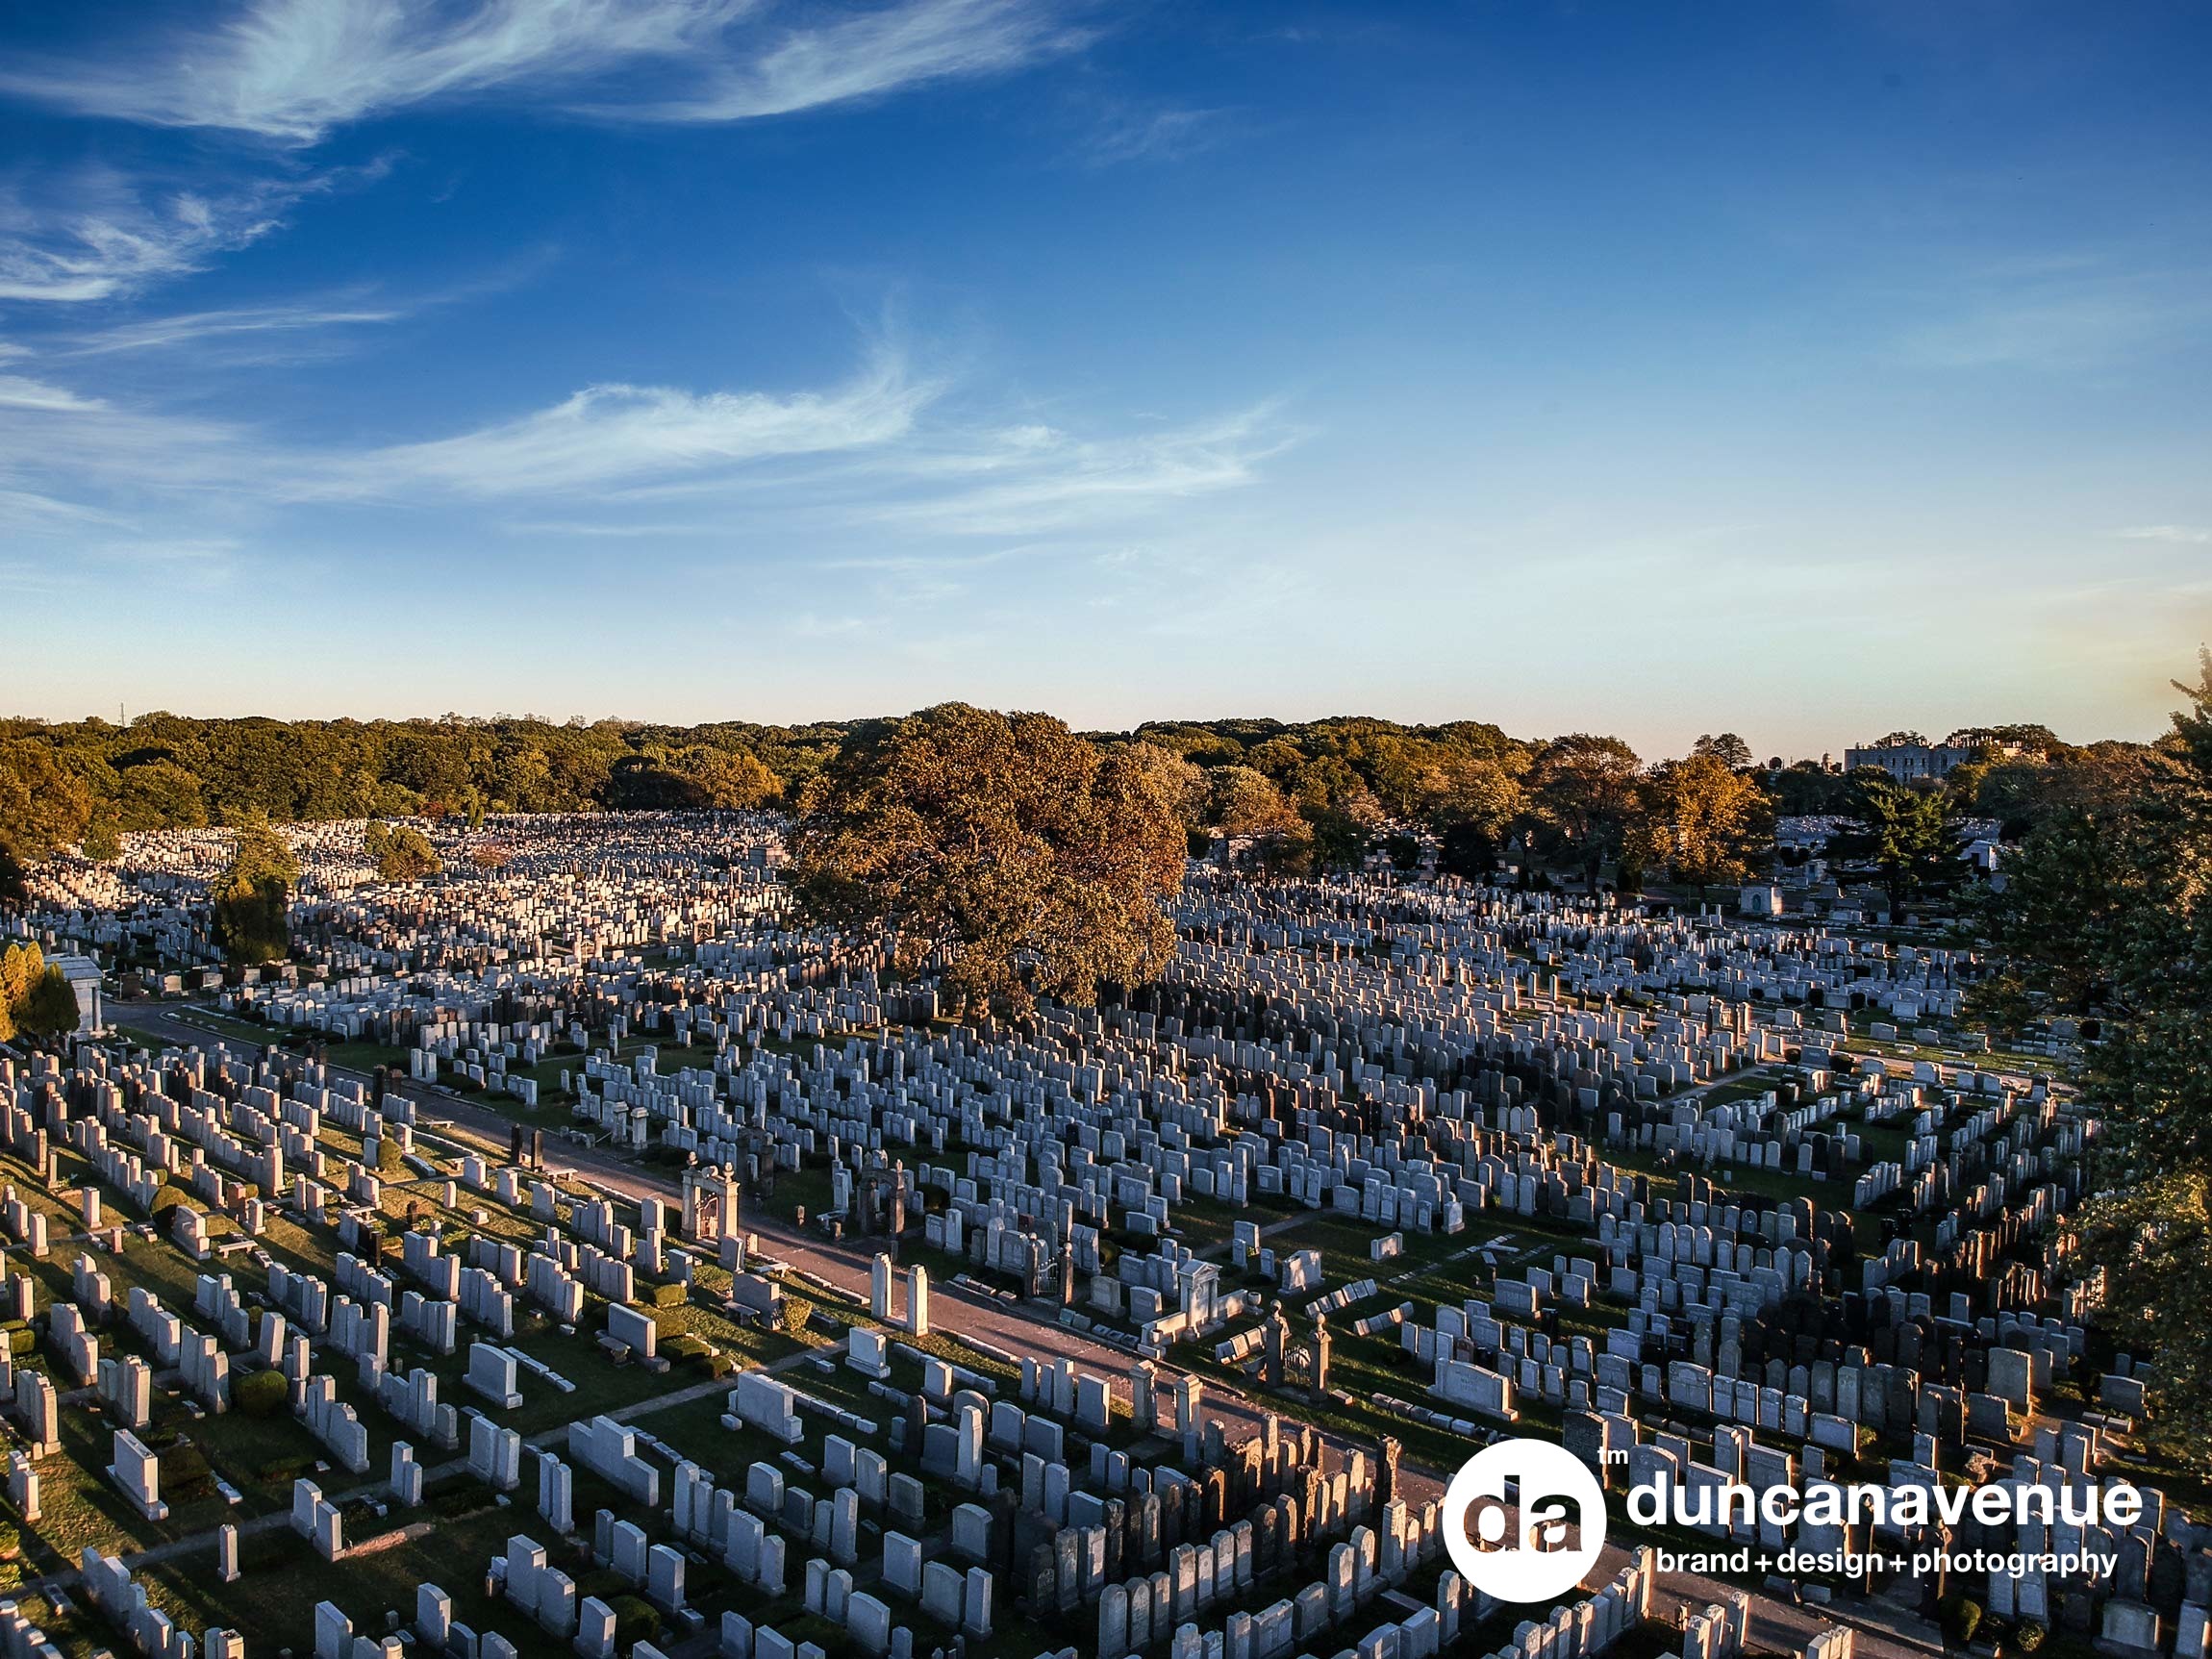 Mt. Lebanon, New York City, Queens, Cemetery - Commercial Real Estate Photography by Duncan Avenue Group